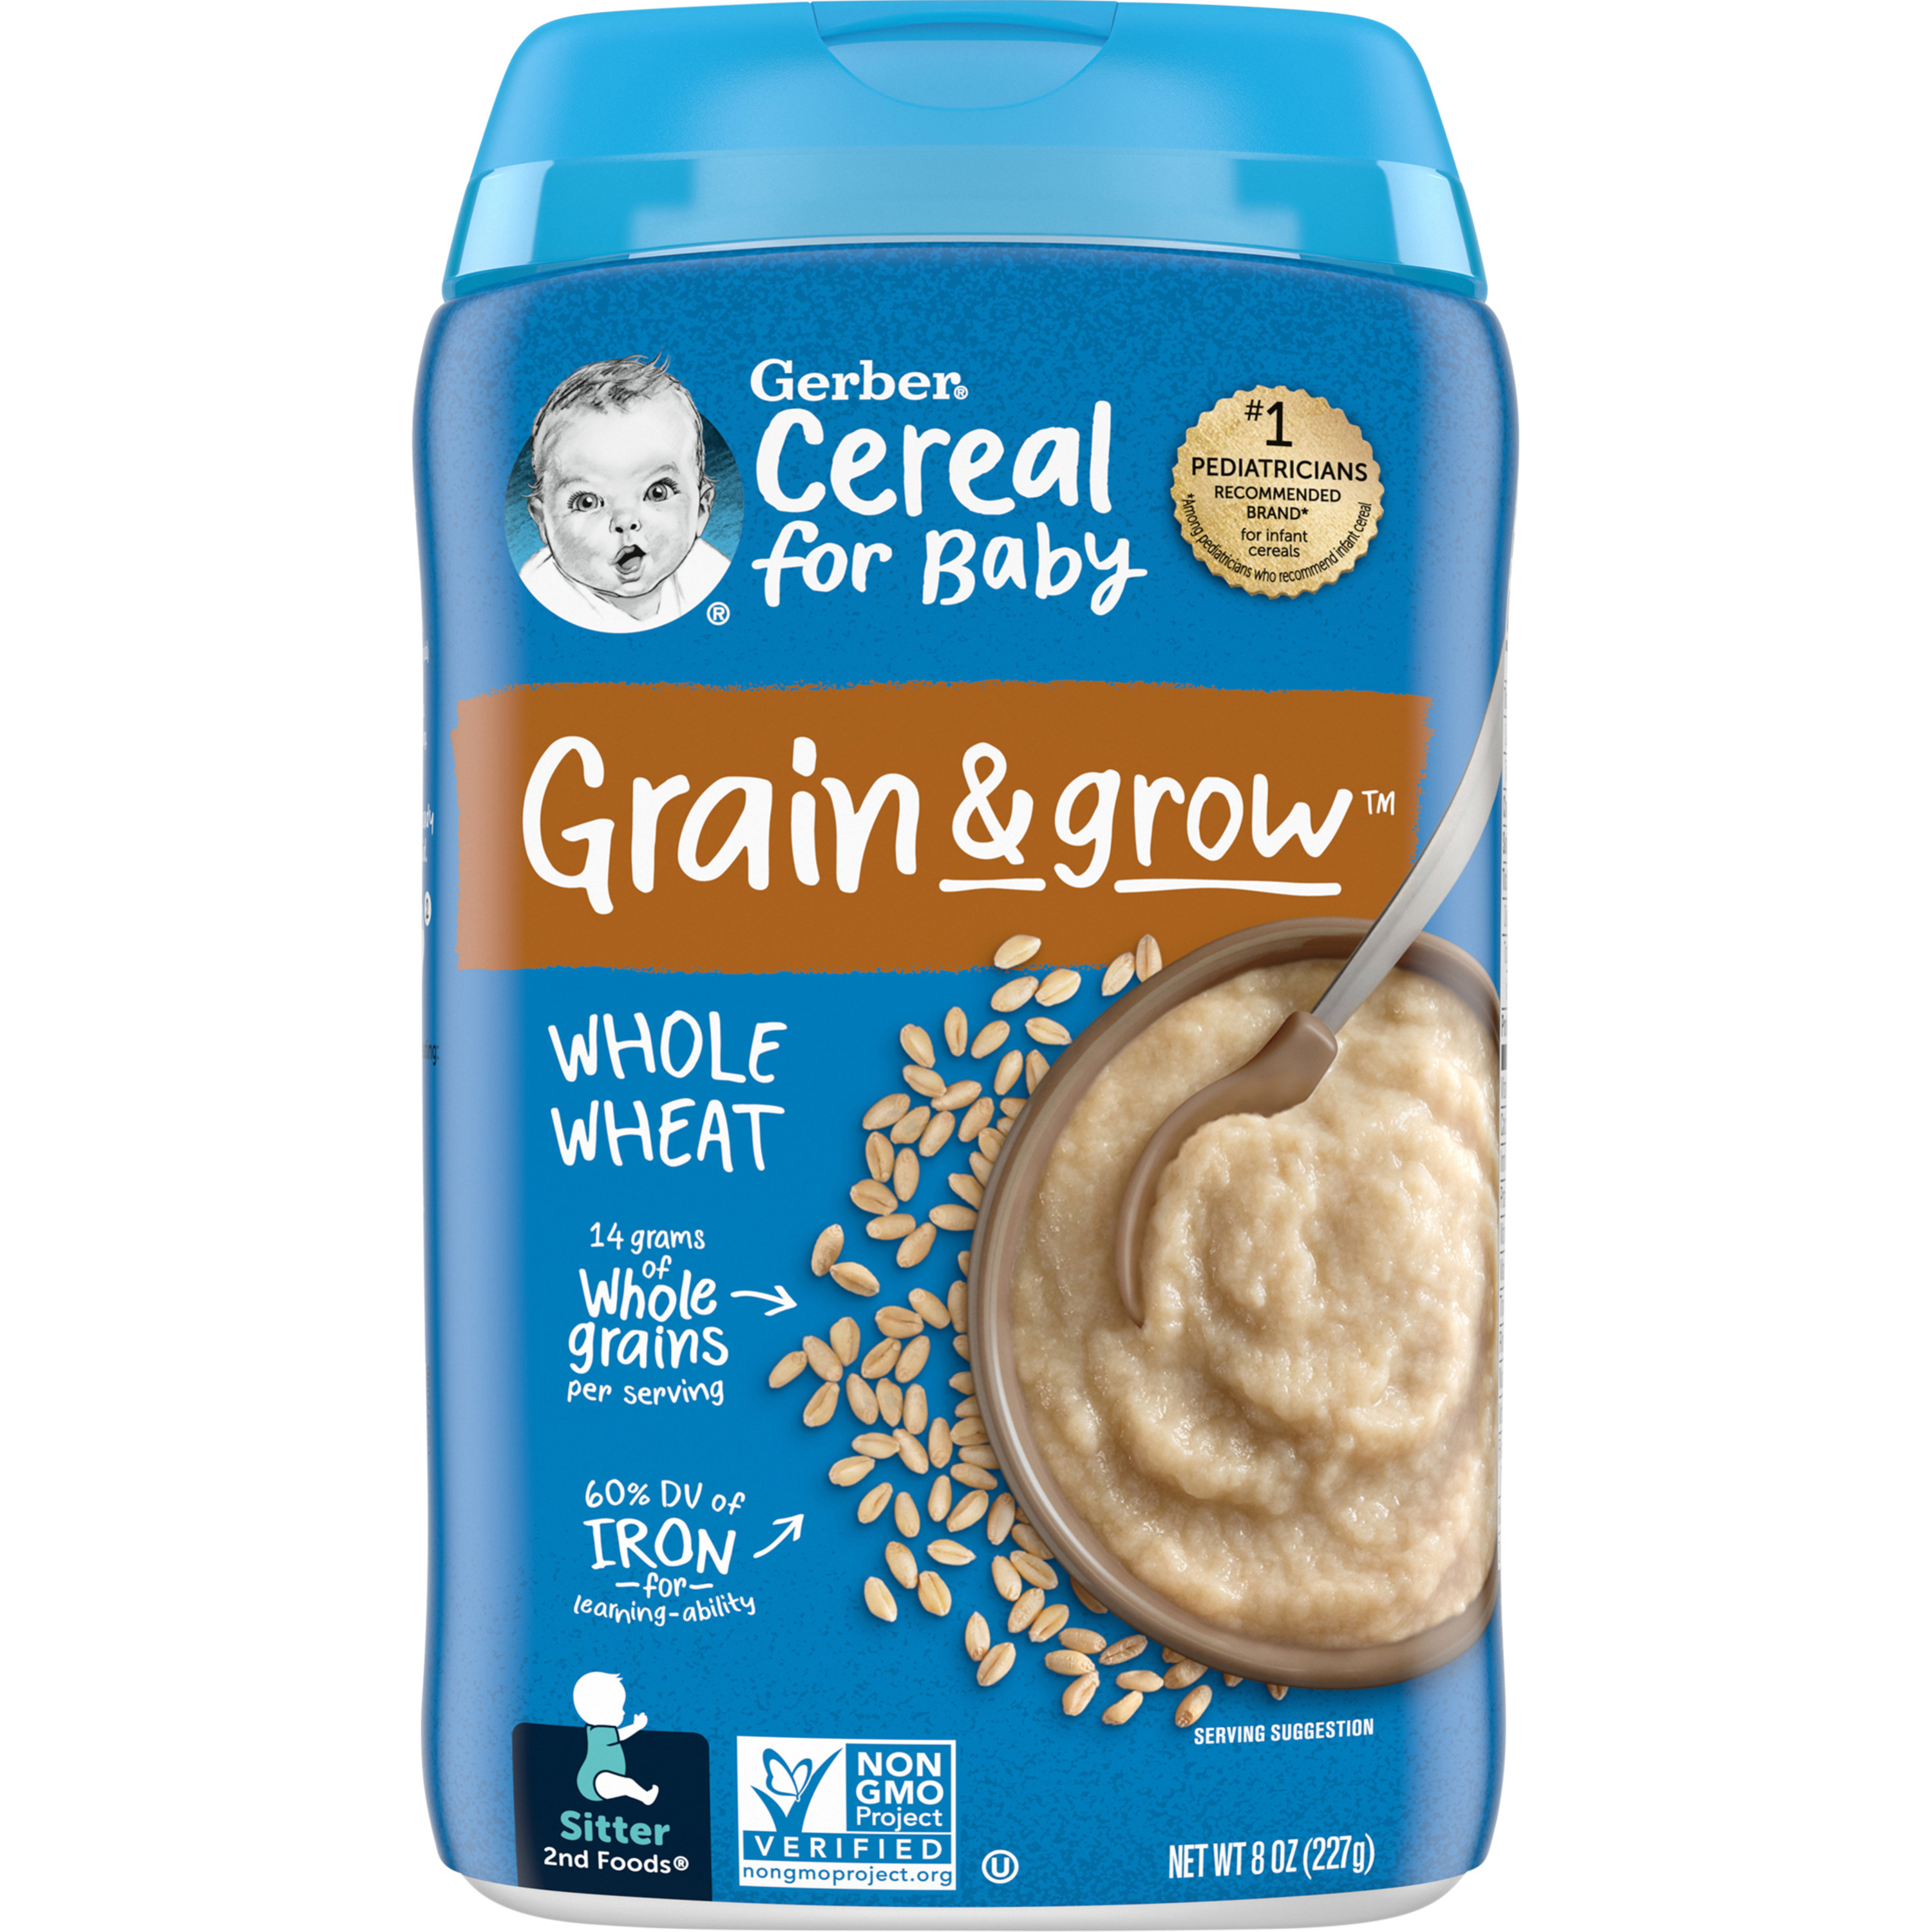 Gerber 1st Foods Cereal for Baby Grain & Grow Baby Cereal, Whole Wheat, 8 oz Canister - image 1 of 8